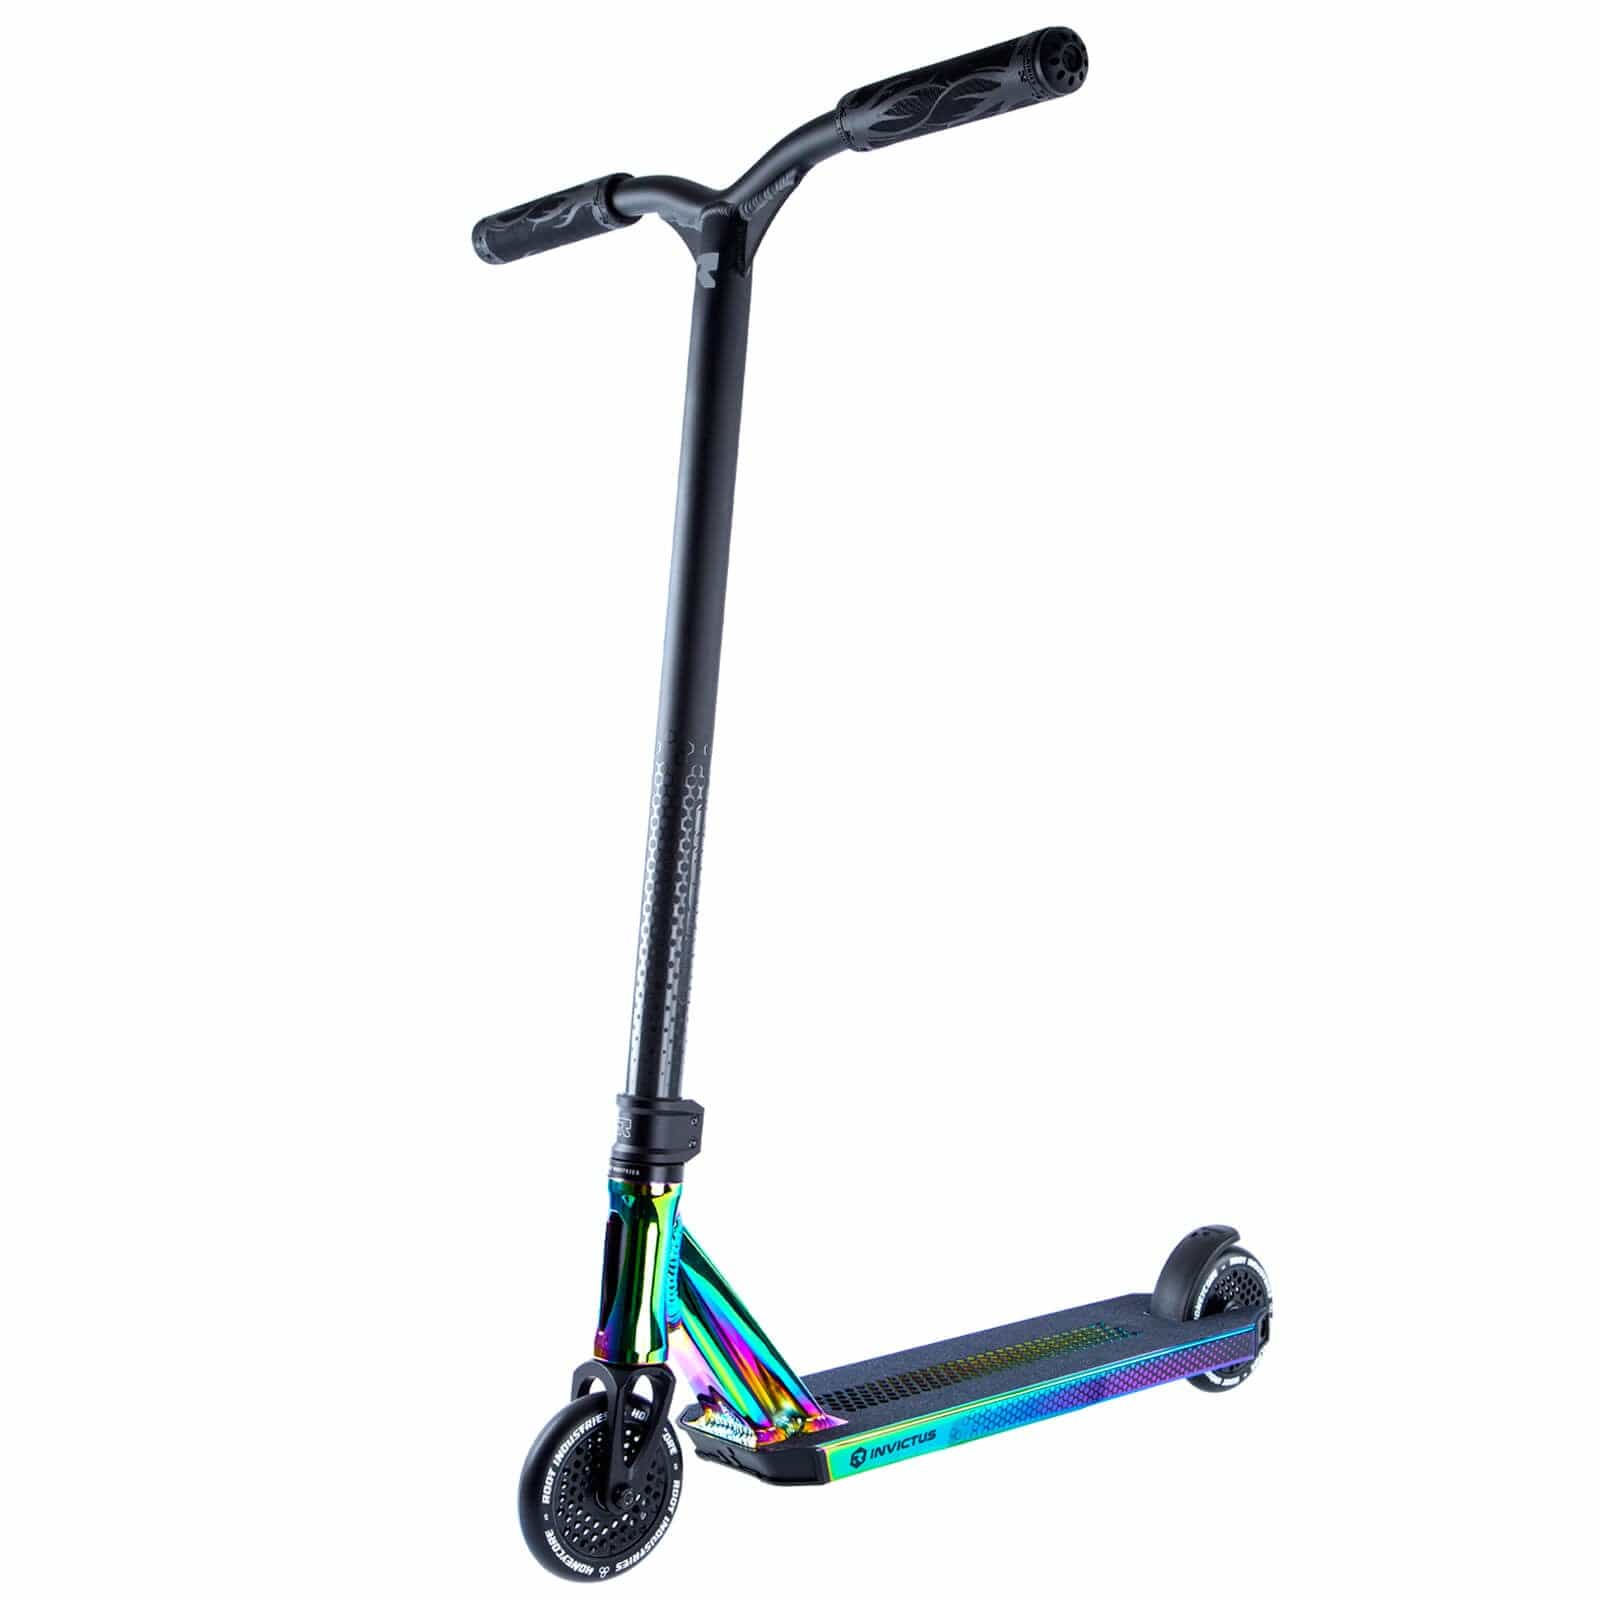 Root Industries Invictus 2 Complete |COMPLETE SCOOTERS |$169.99 |TSP The Shop | Root Industries Invictus 2 | PROSCOOTERLAB